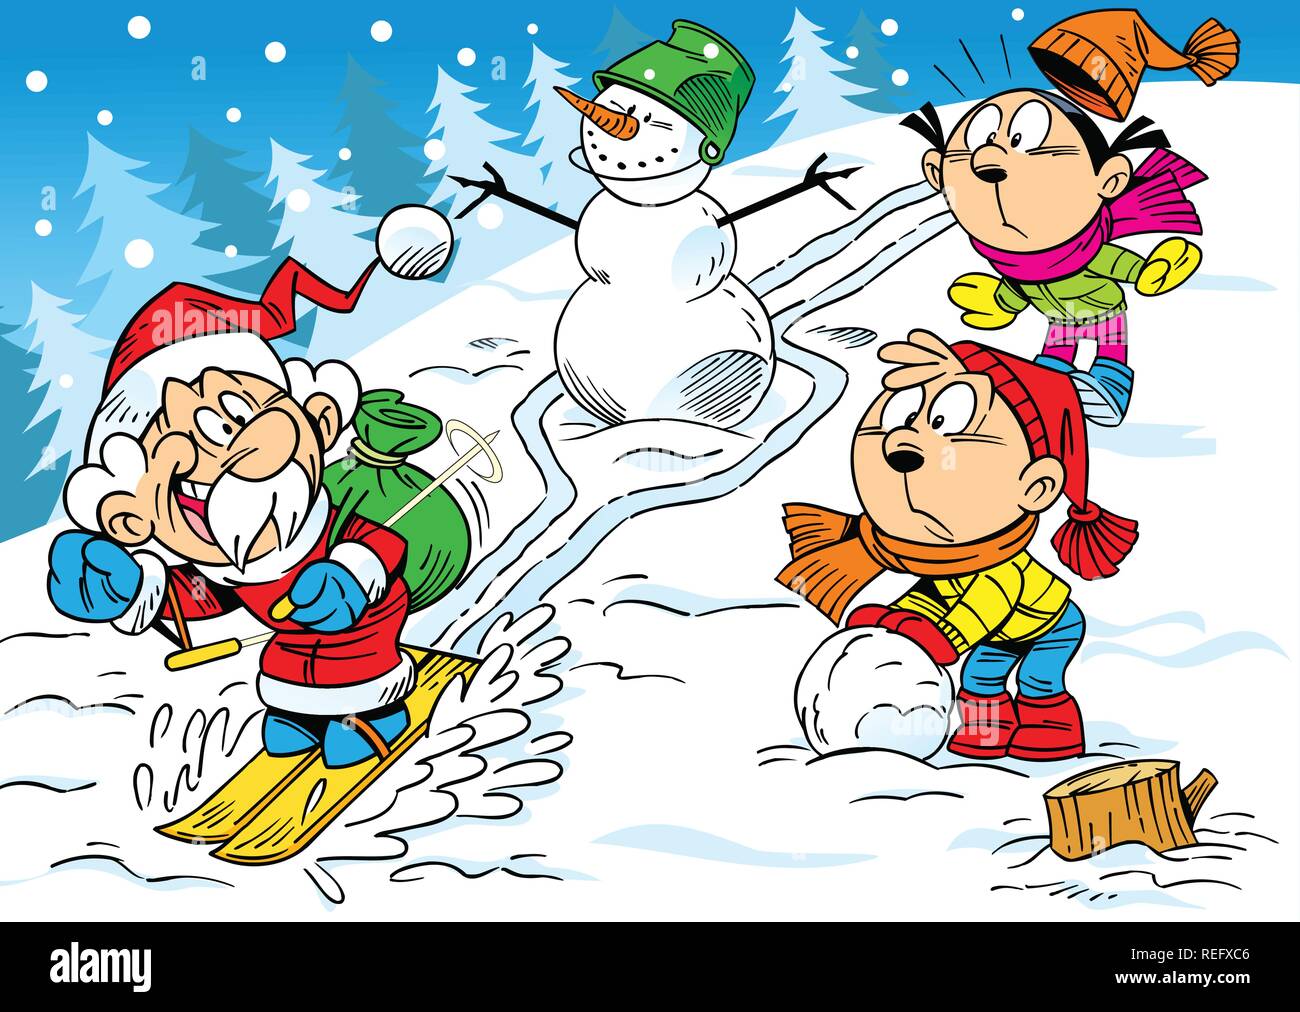 The illustration shows how the children have fun and relax in the winter holidays. Illustration done in cartoon style, on separate layers. Stock Vector